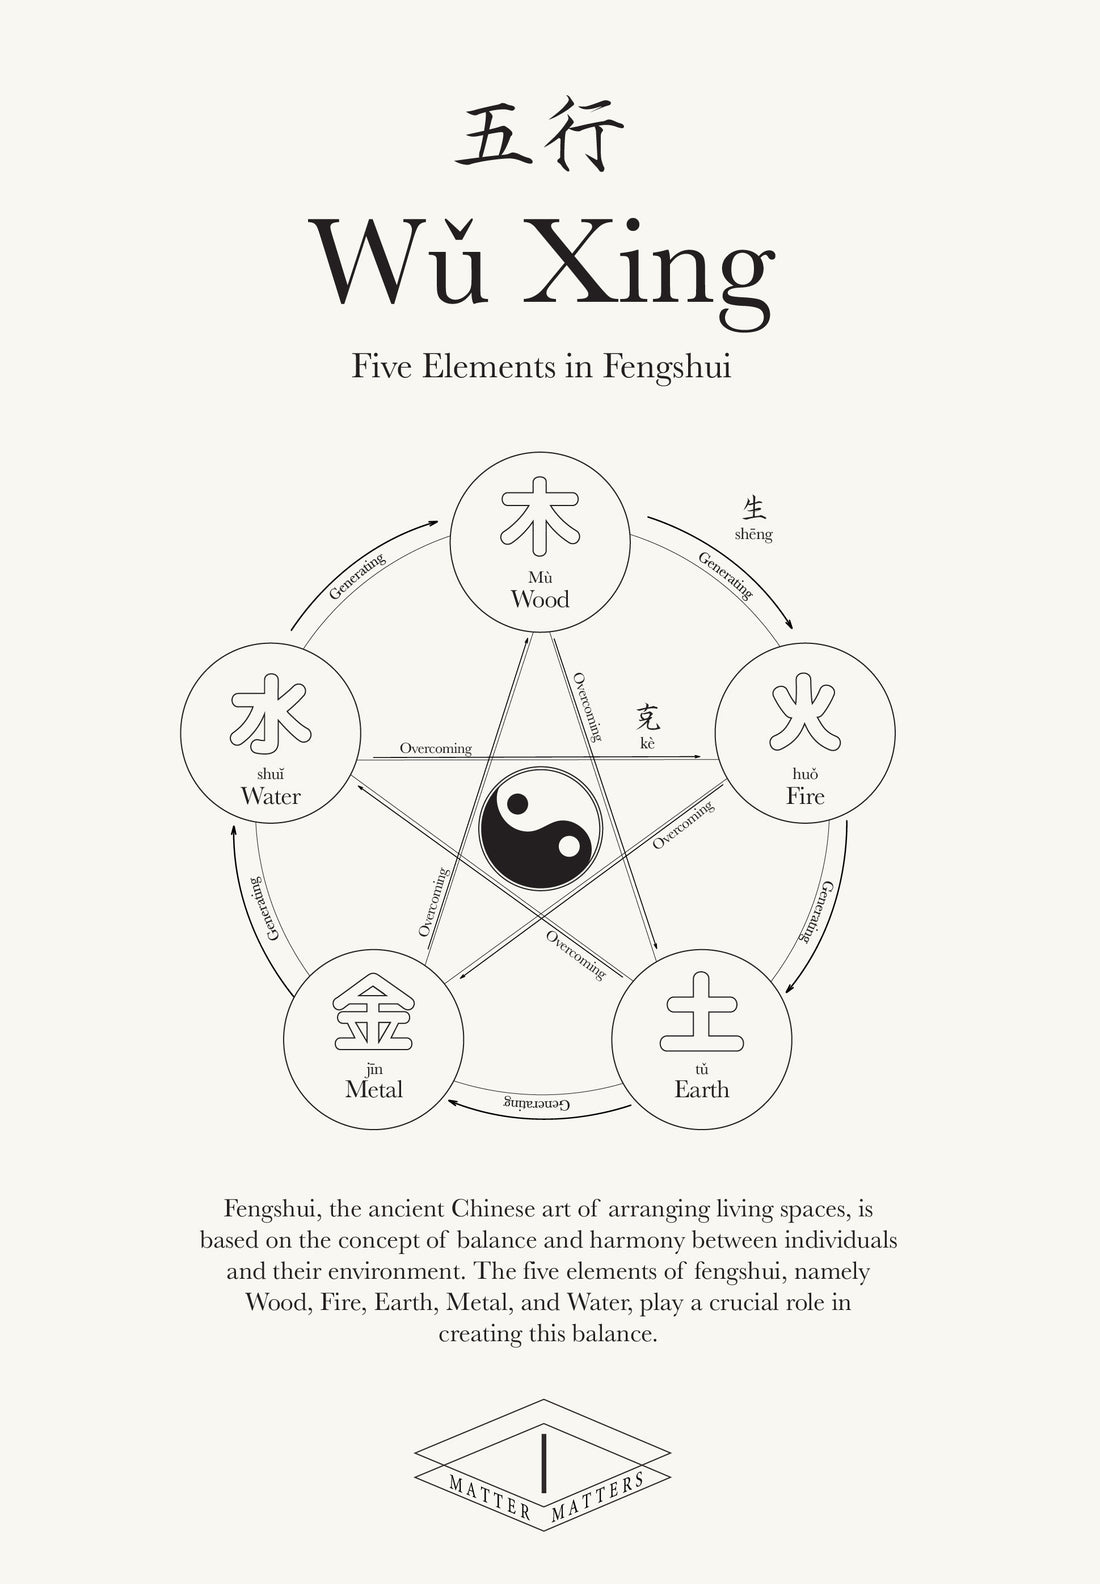 Metal Element in Chinese Astrology